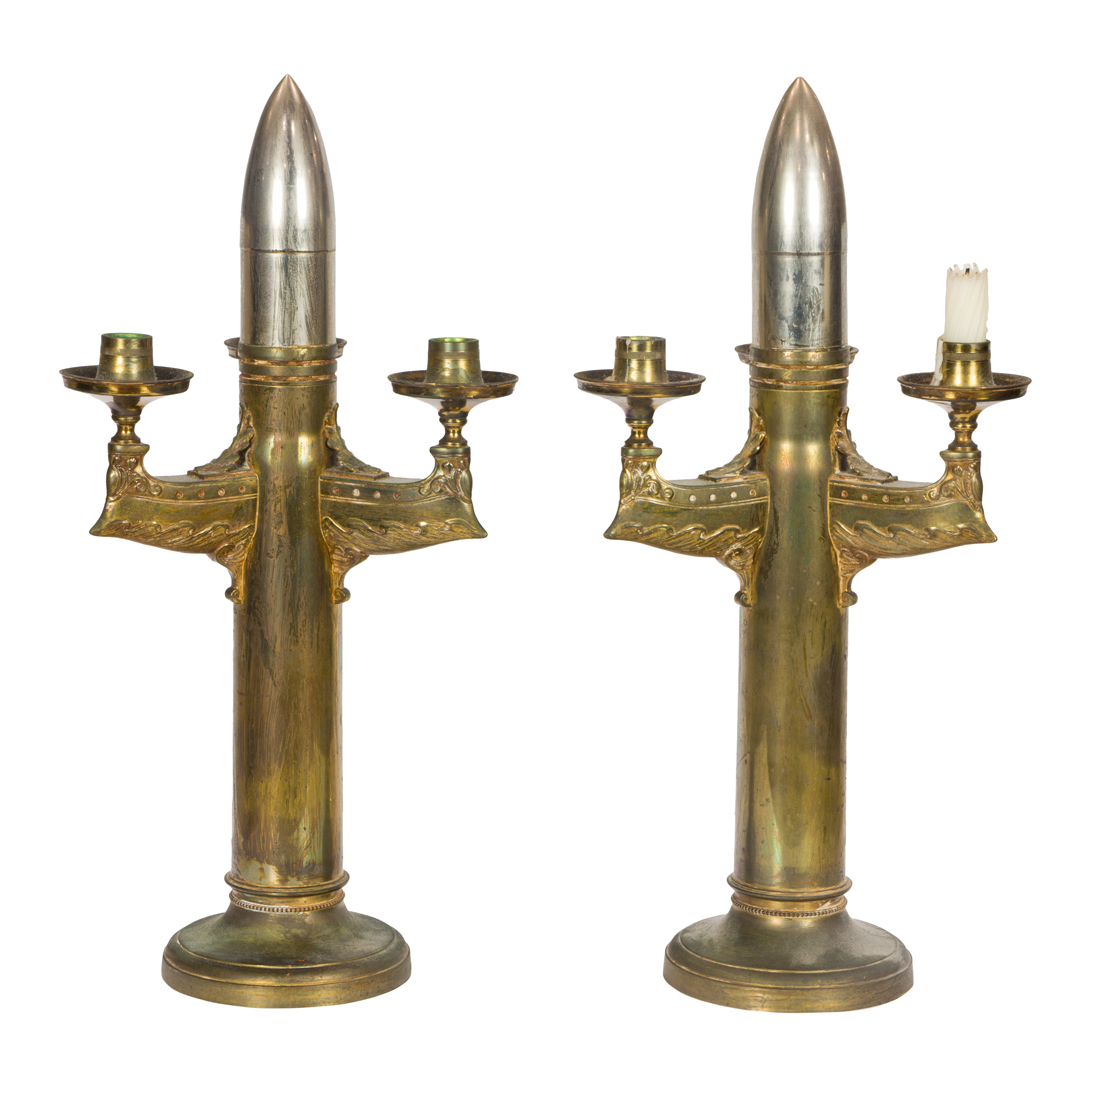 A PAIR OF SWEDISH TRENCH ART BRASS